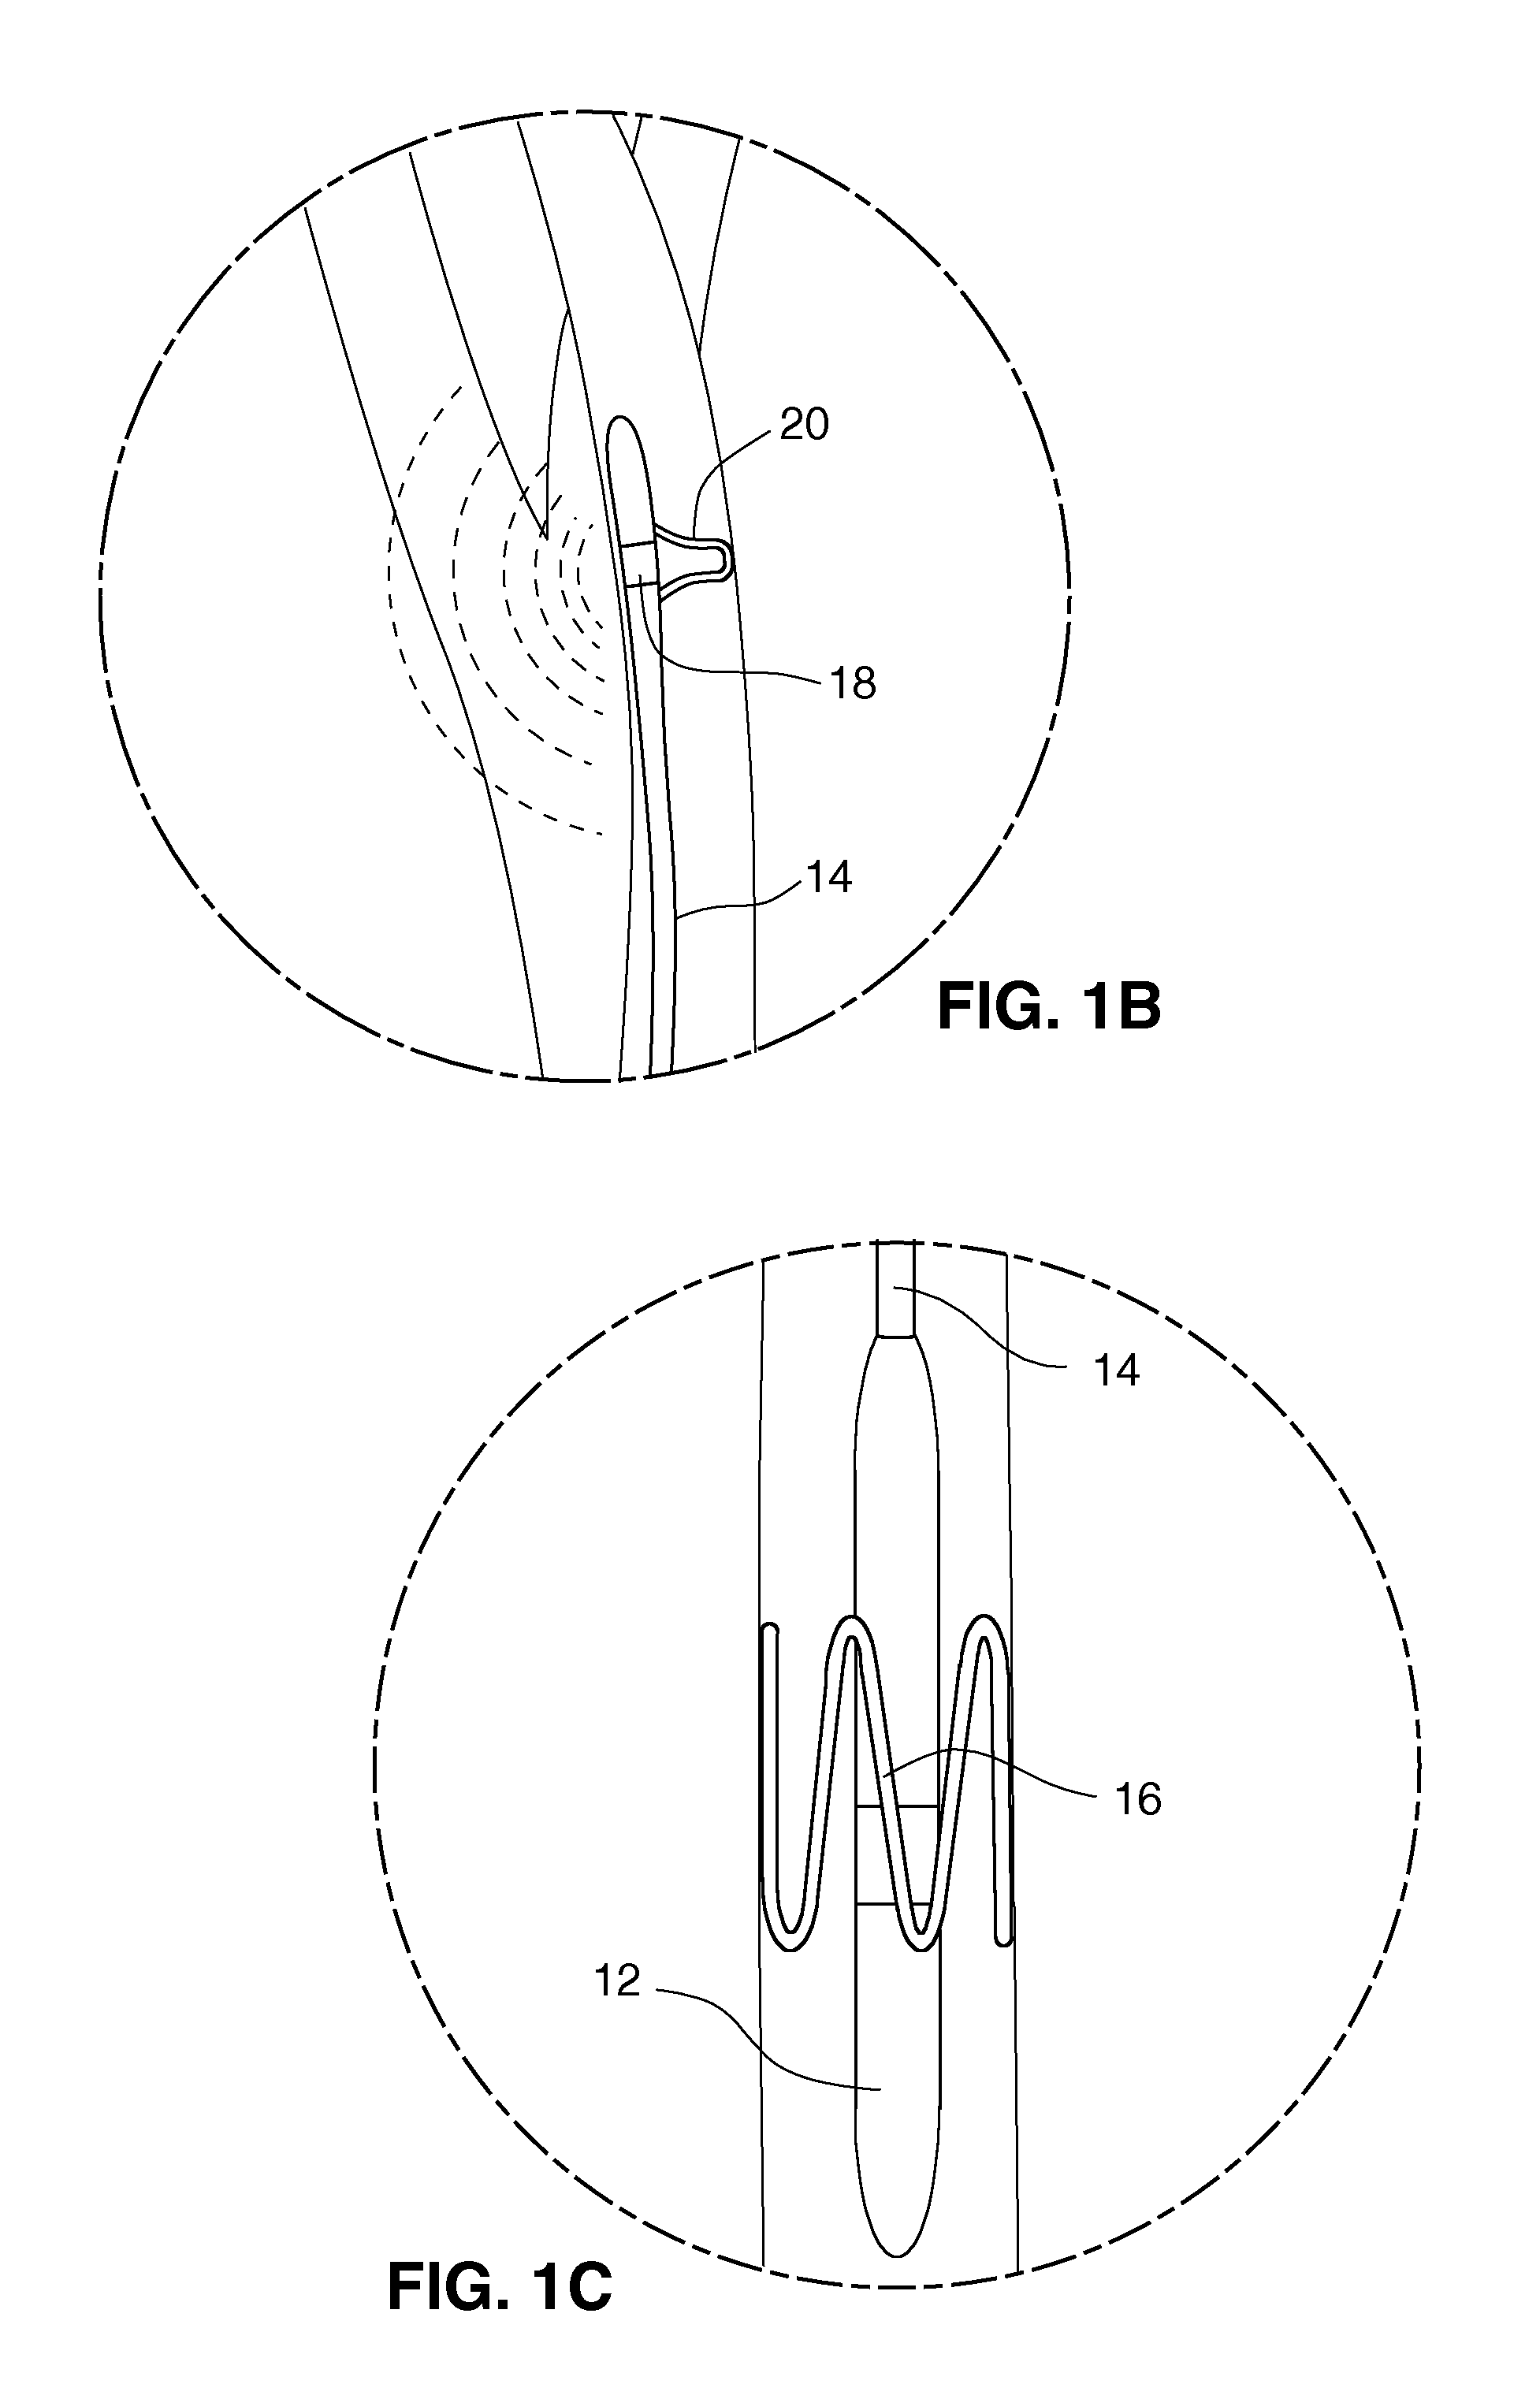 System and method for transvascularly stimulating contents of the carotid sheath